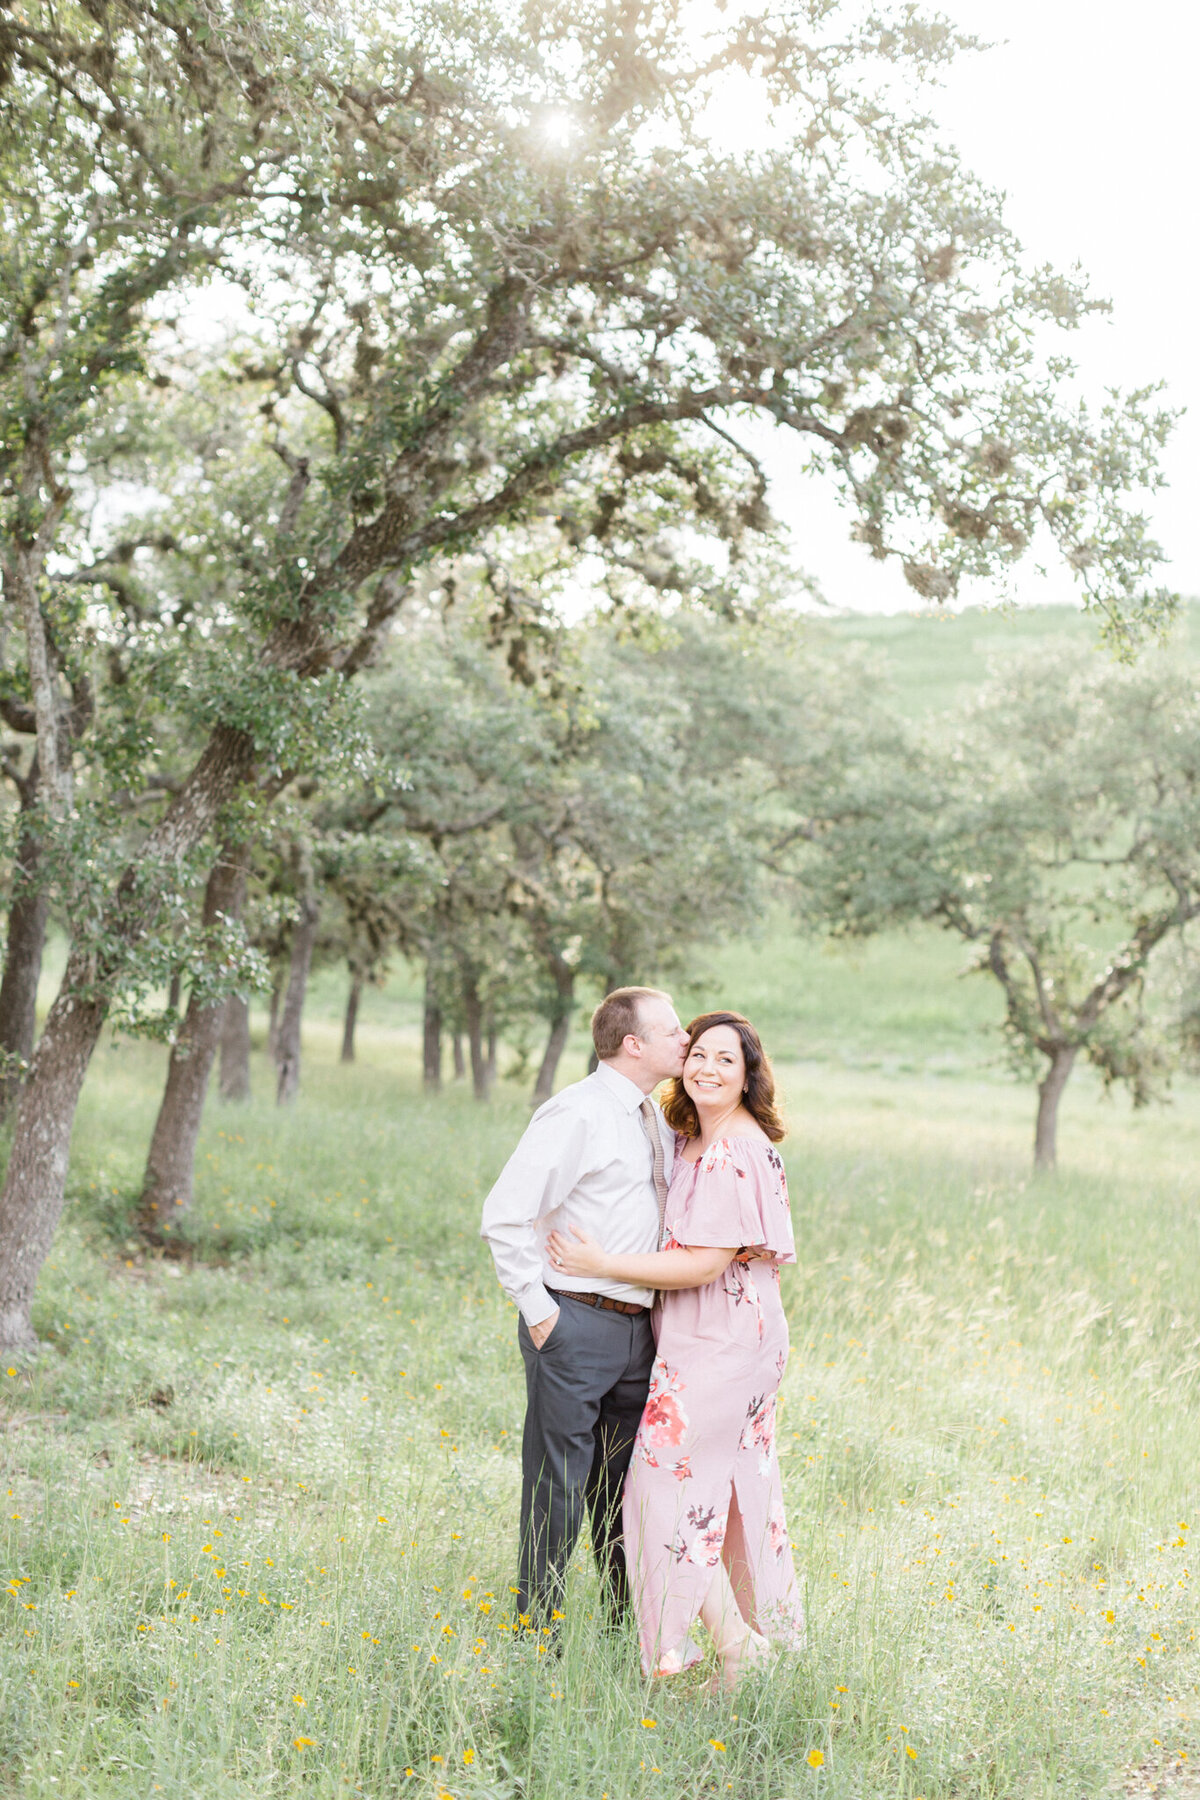 Jessica Chole Photography San Antonio Texas California Wedding Portrait Engagement Maternity Family Lifestyle Photographer Souther Cali TX CA Light Airy Bright Colorful Photography1